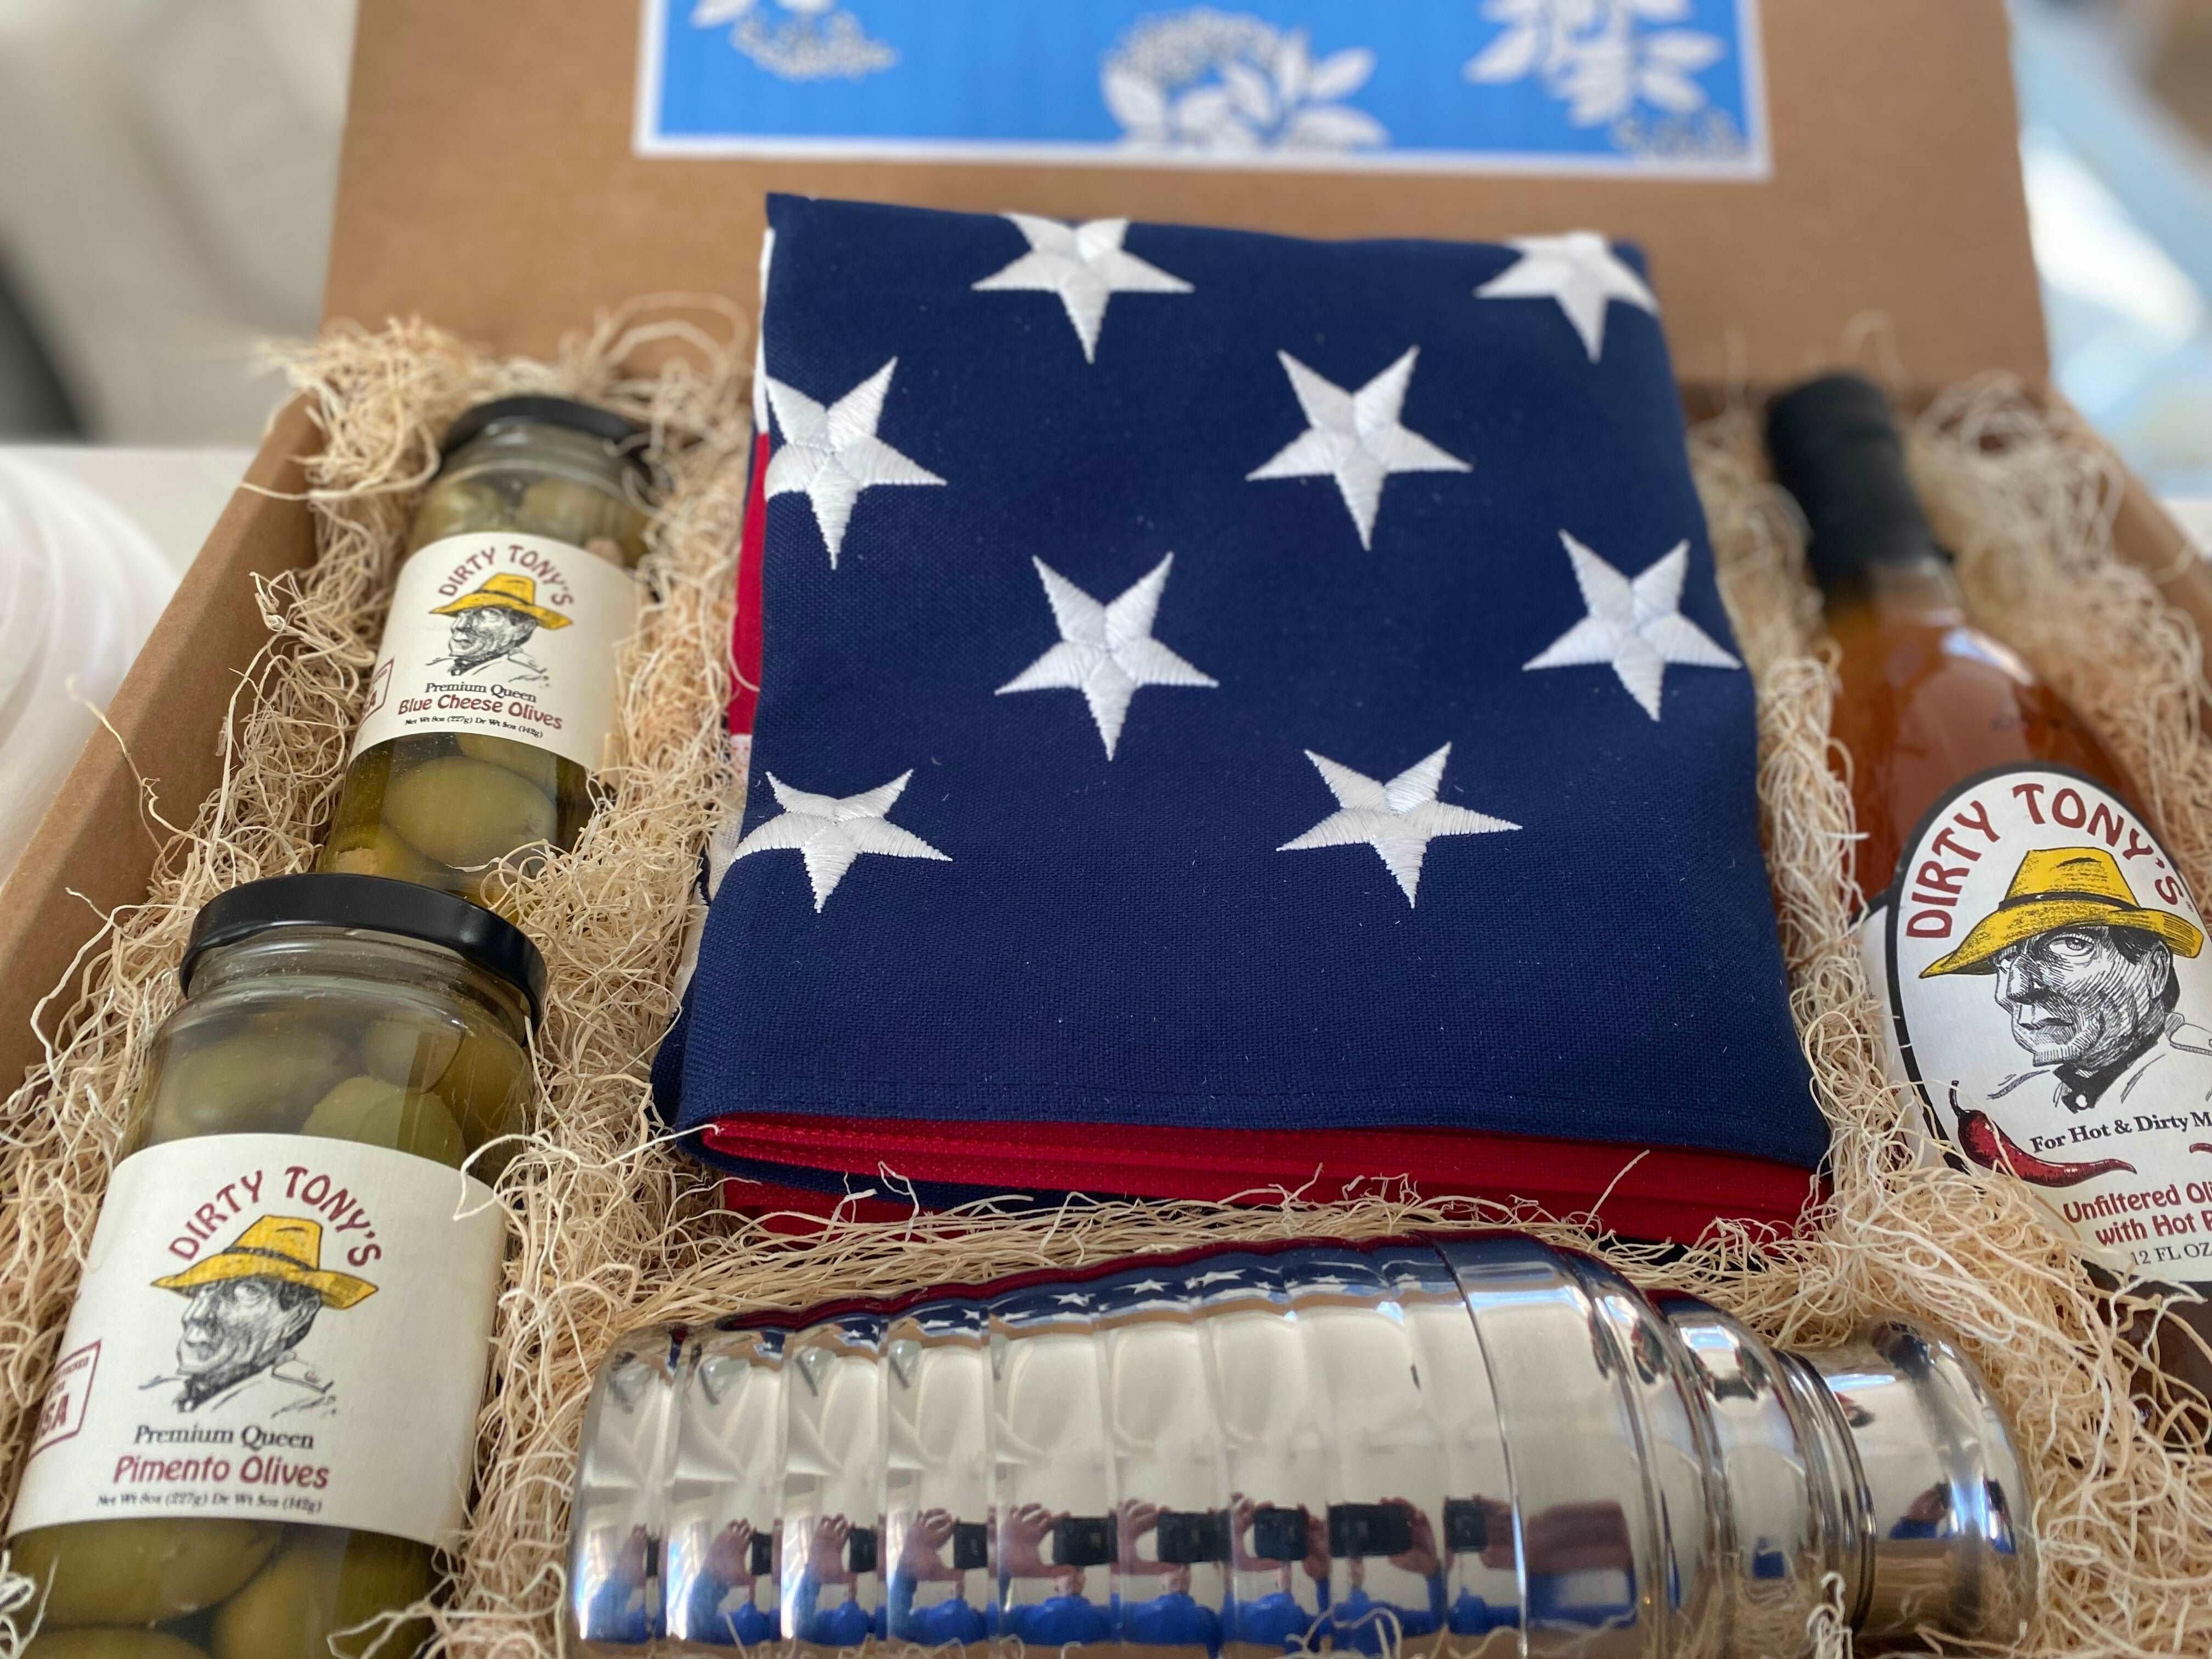 Ultimate Dirty Martini Patriot Pack! - Pledge Project dirty martini gift set